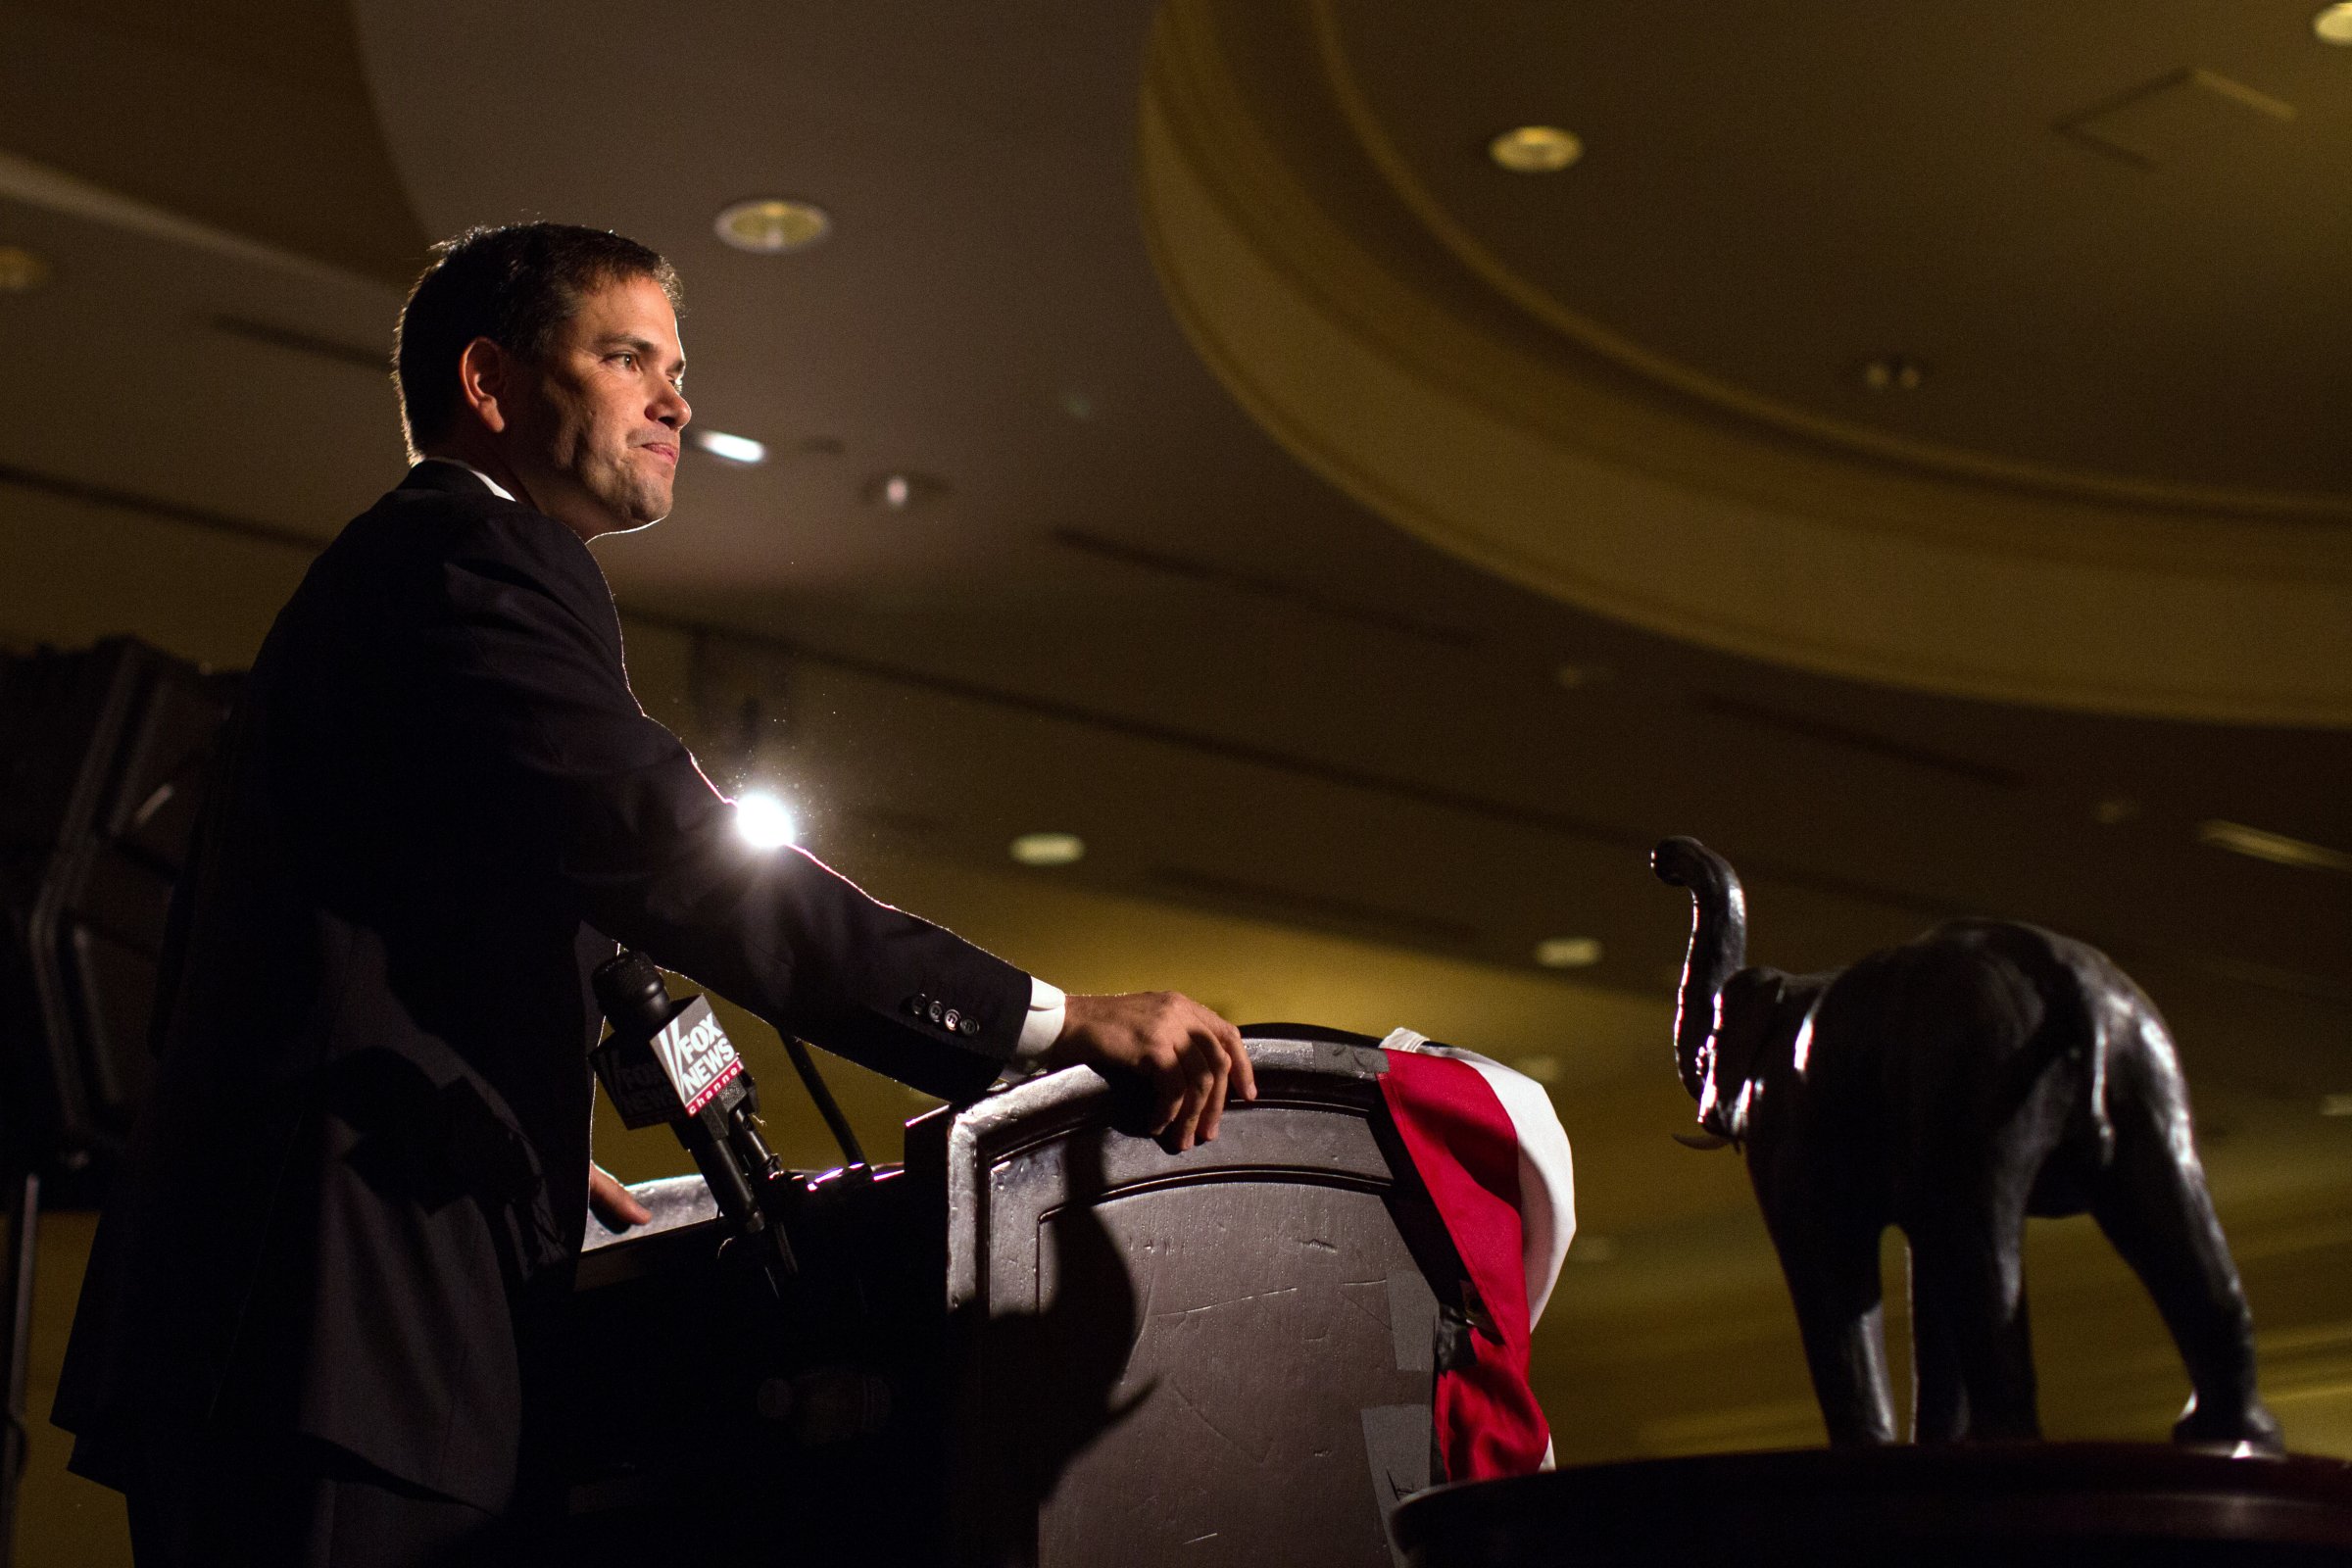 Senator Marco Rubio addresses the New Hampshire Rockingham Committee Freed Founder's Dinner in New Castle, N.H., on May 9, 2014.